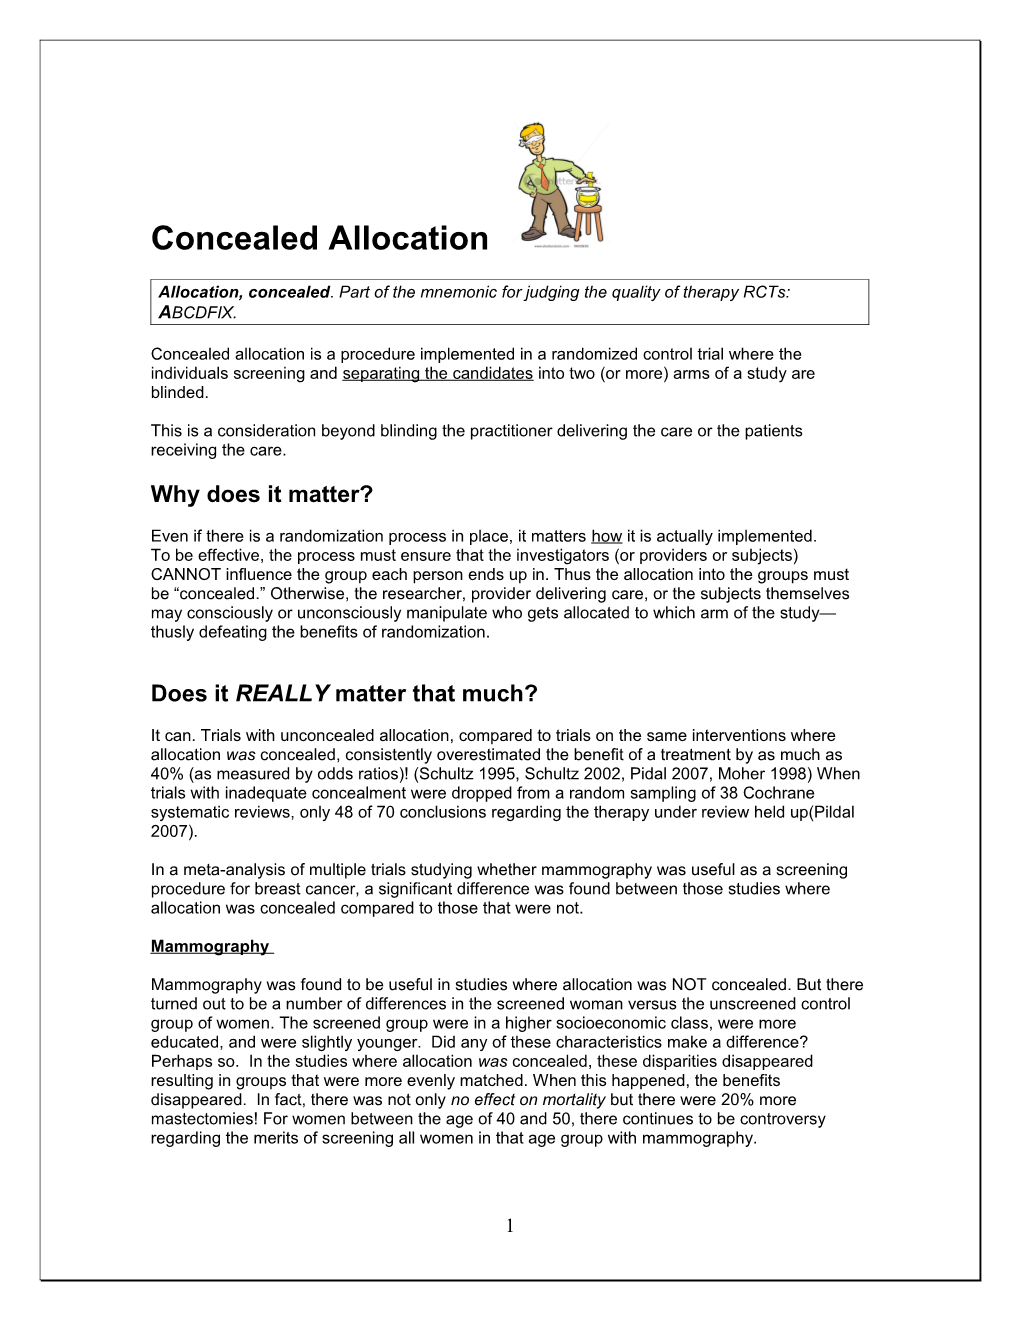 Allocation, Concealed . Part of the Mnemonic for Judging the Quality of Therapy Rcts: ABCDFIX